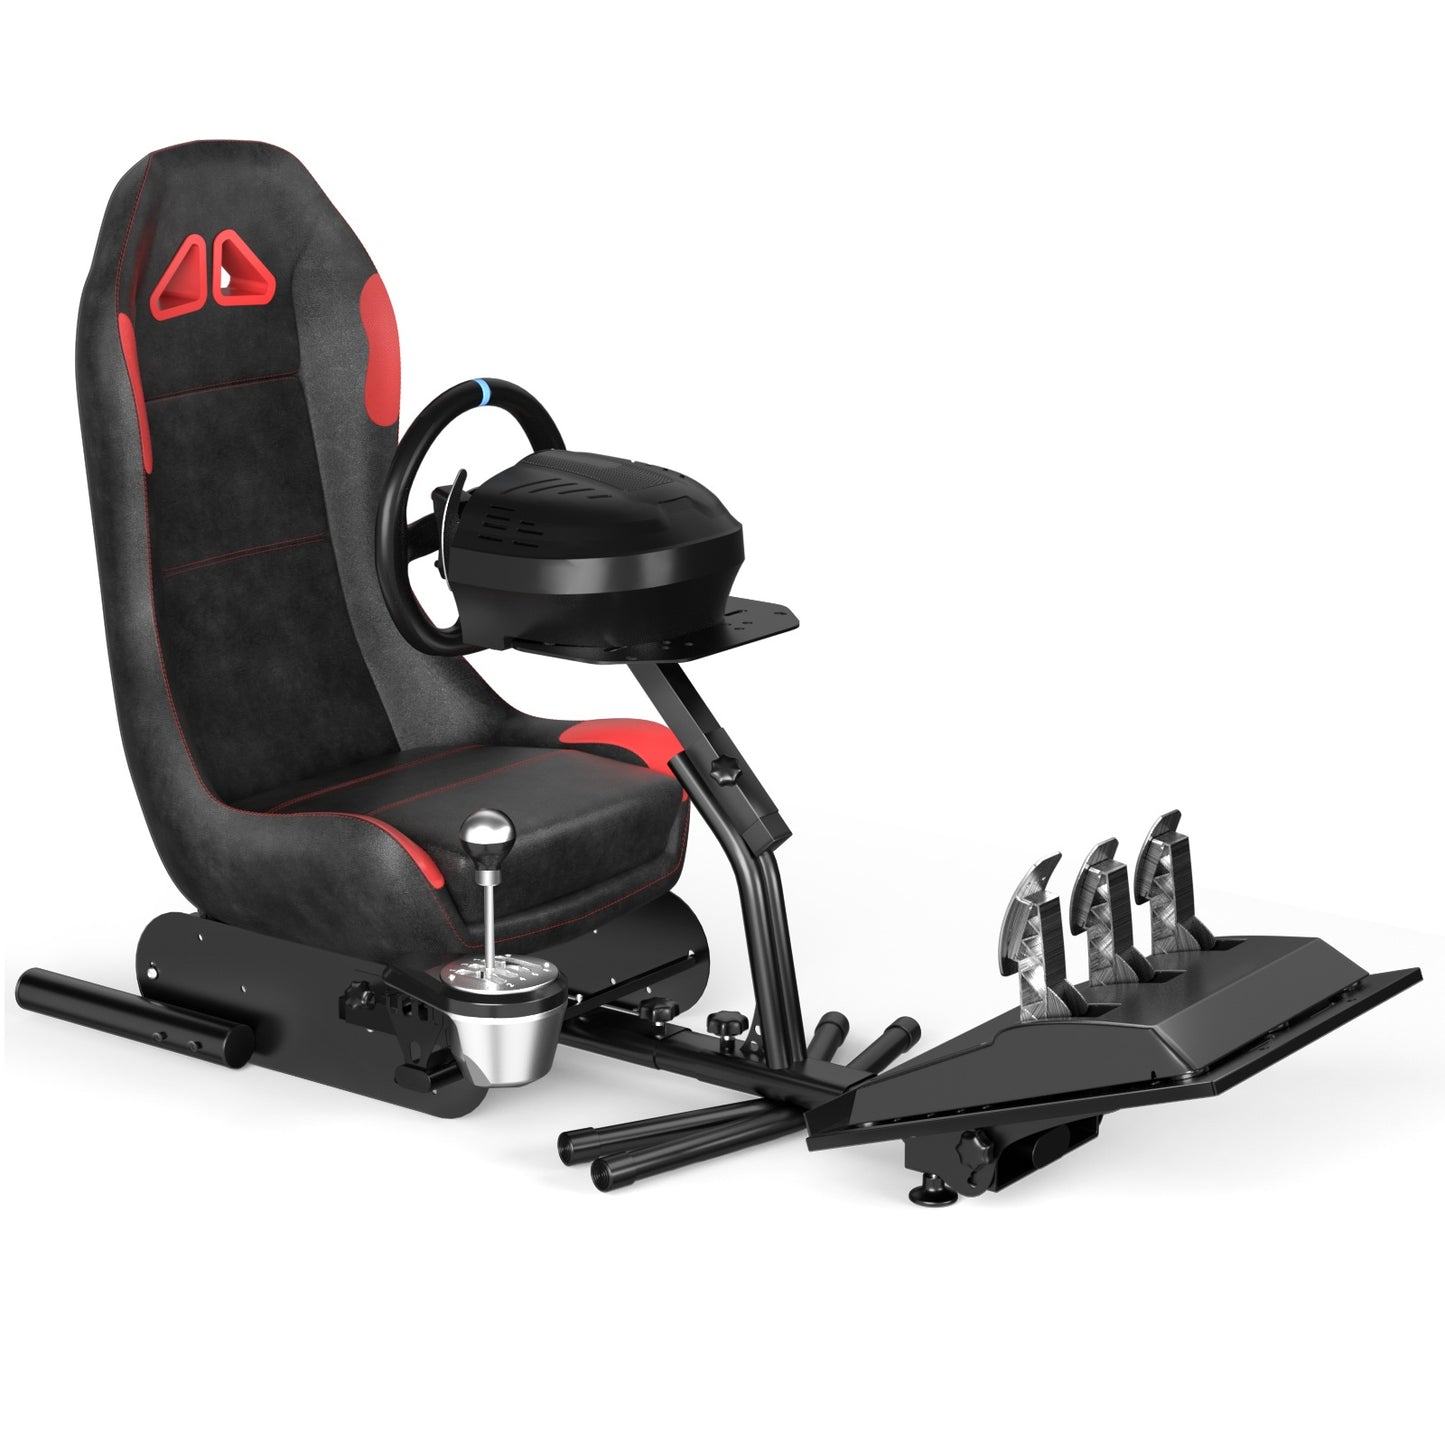 D306X racing simulator cockpit with seat